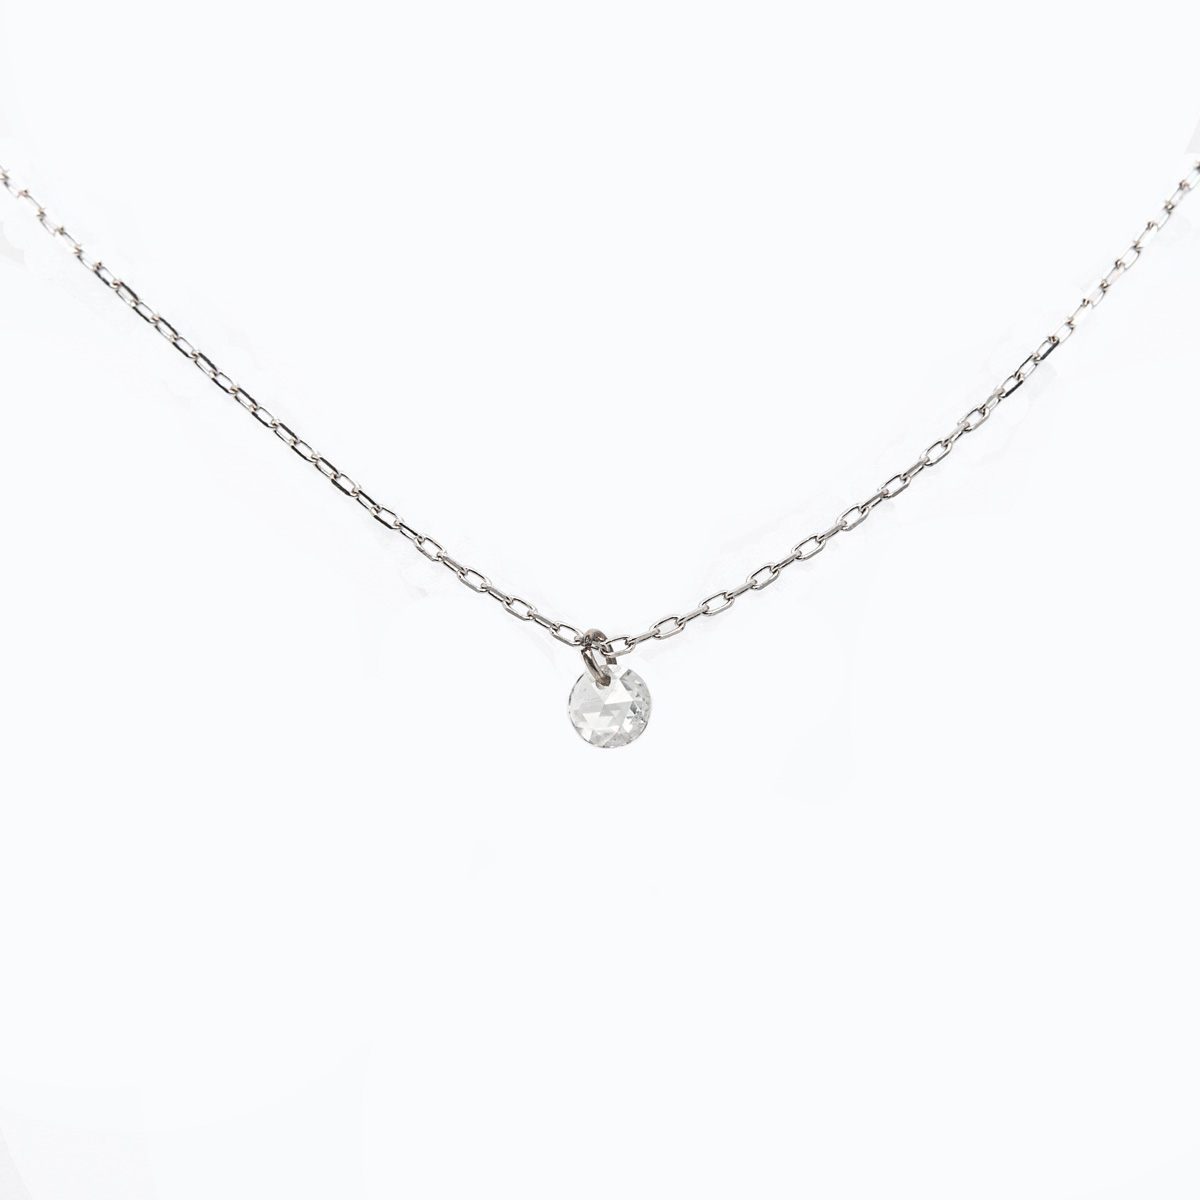 Drilled Rose-cut Diamond Necklace